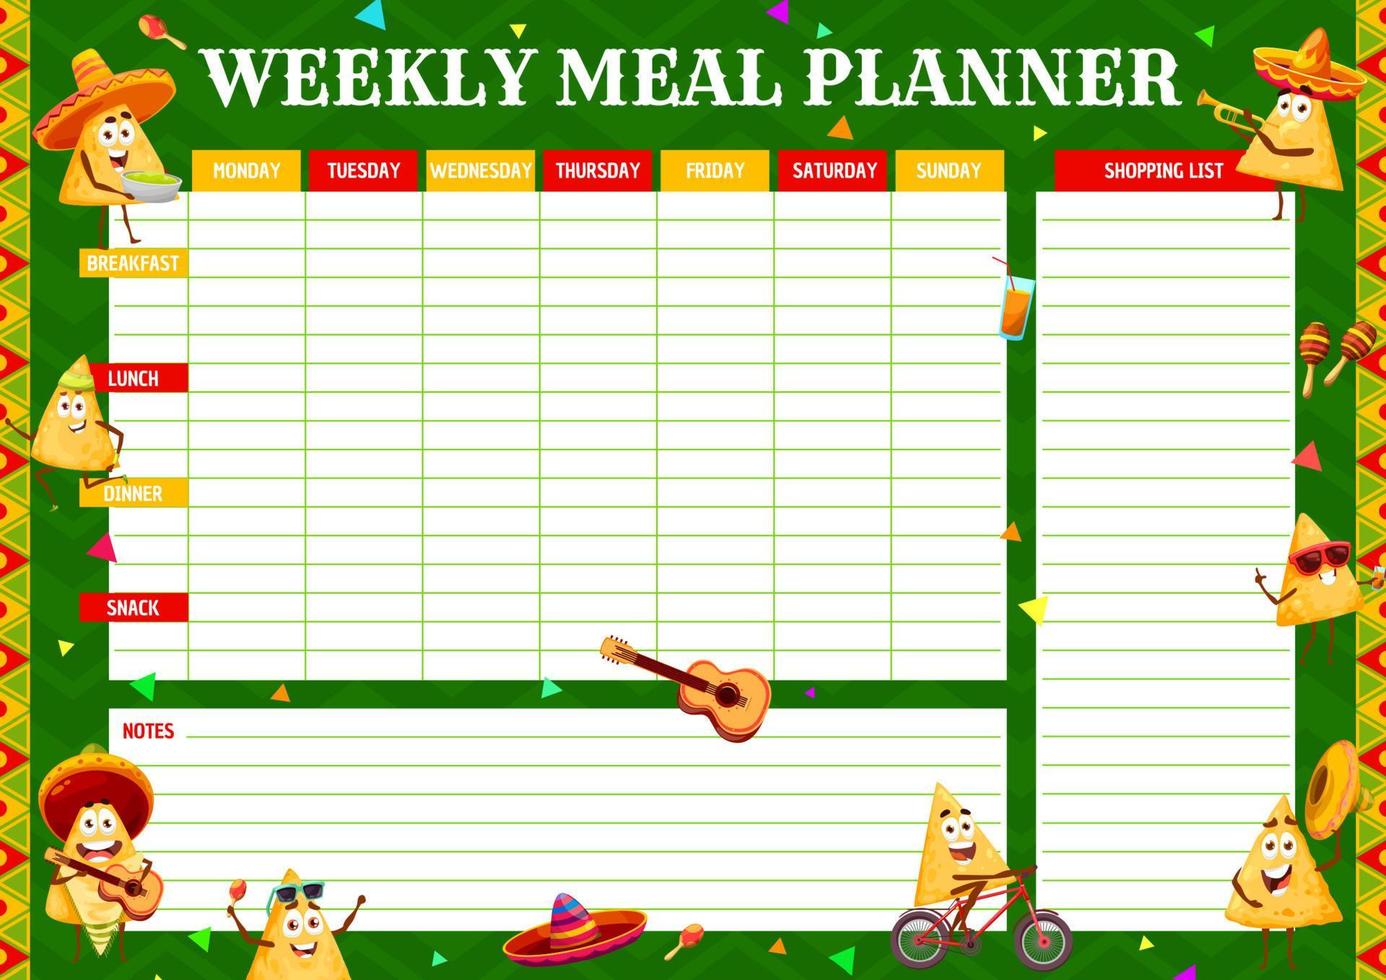 Weekly meal planner with mexican nachos characters vector